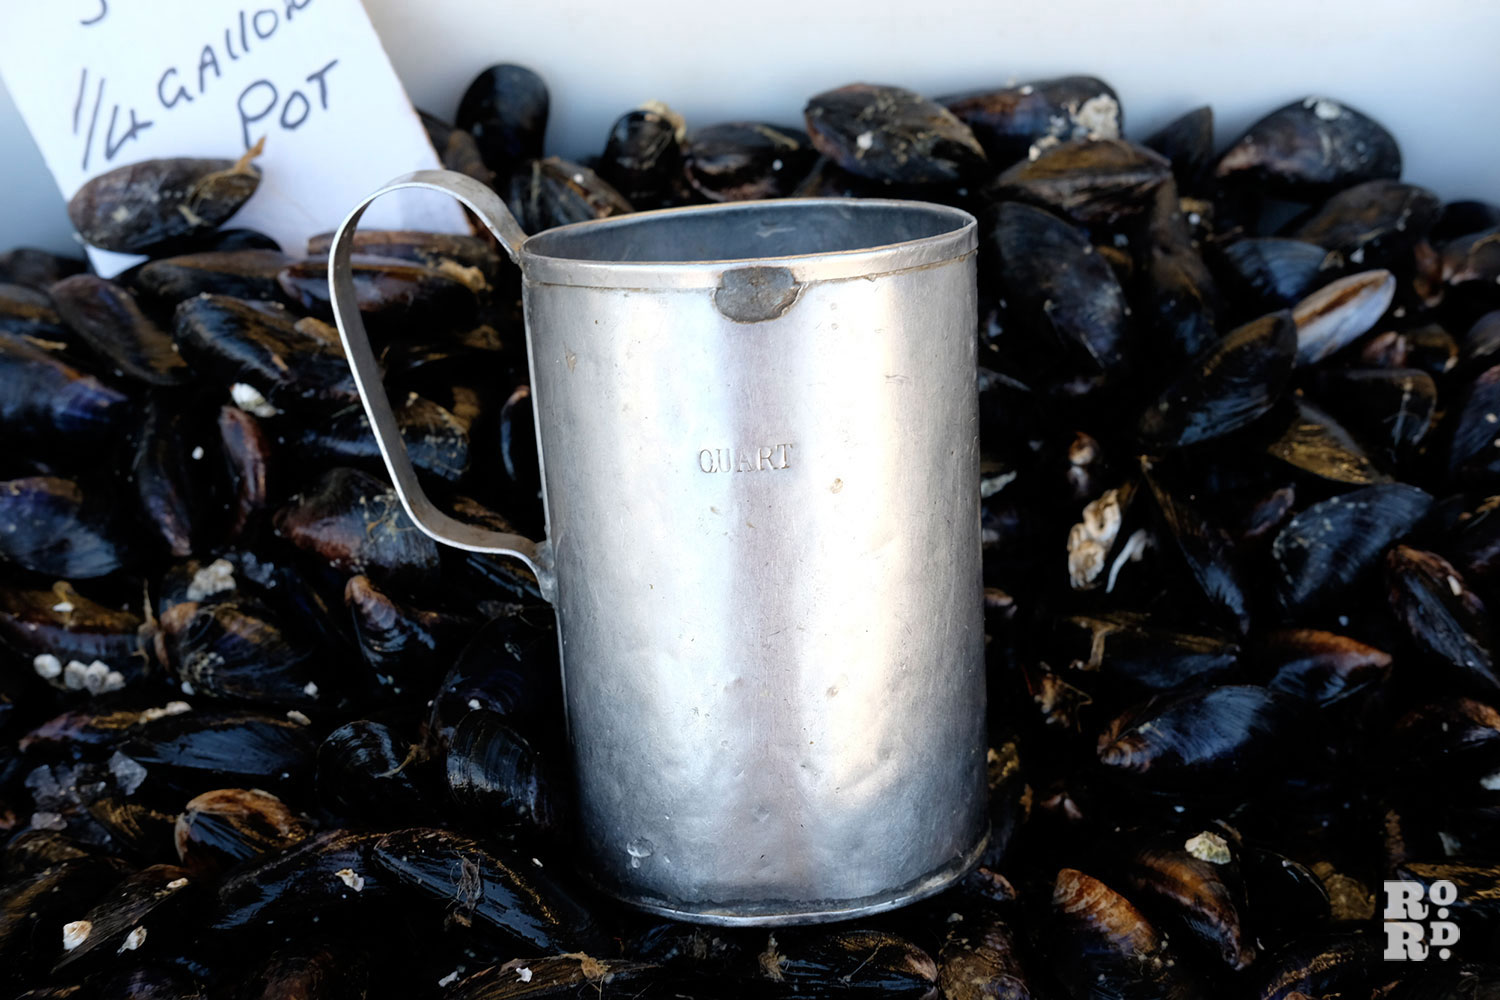  old quart cup used for measuring shellfish at East End fish stall